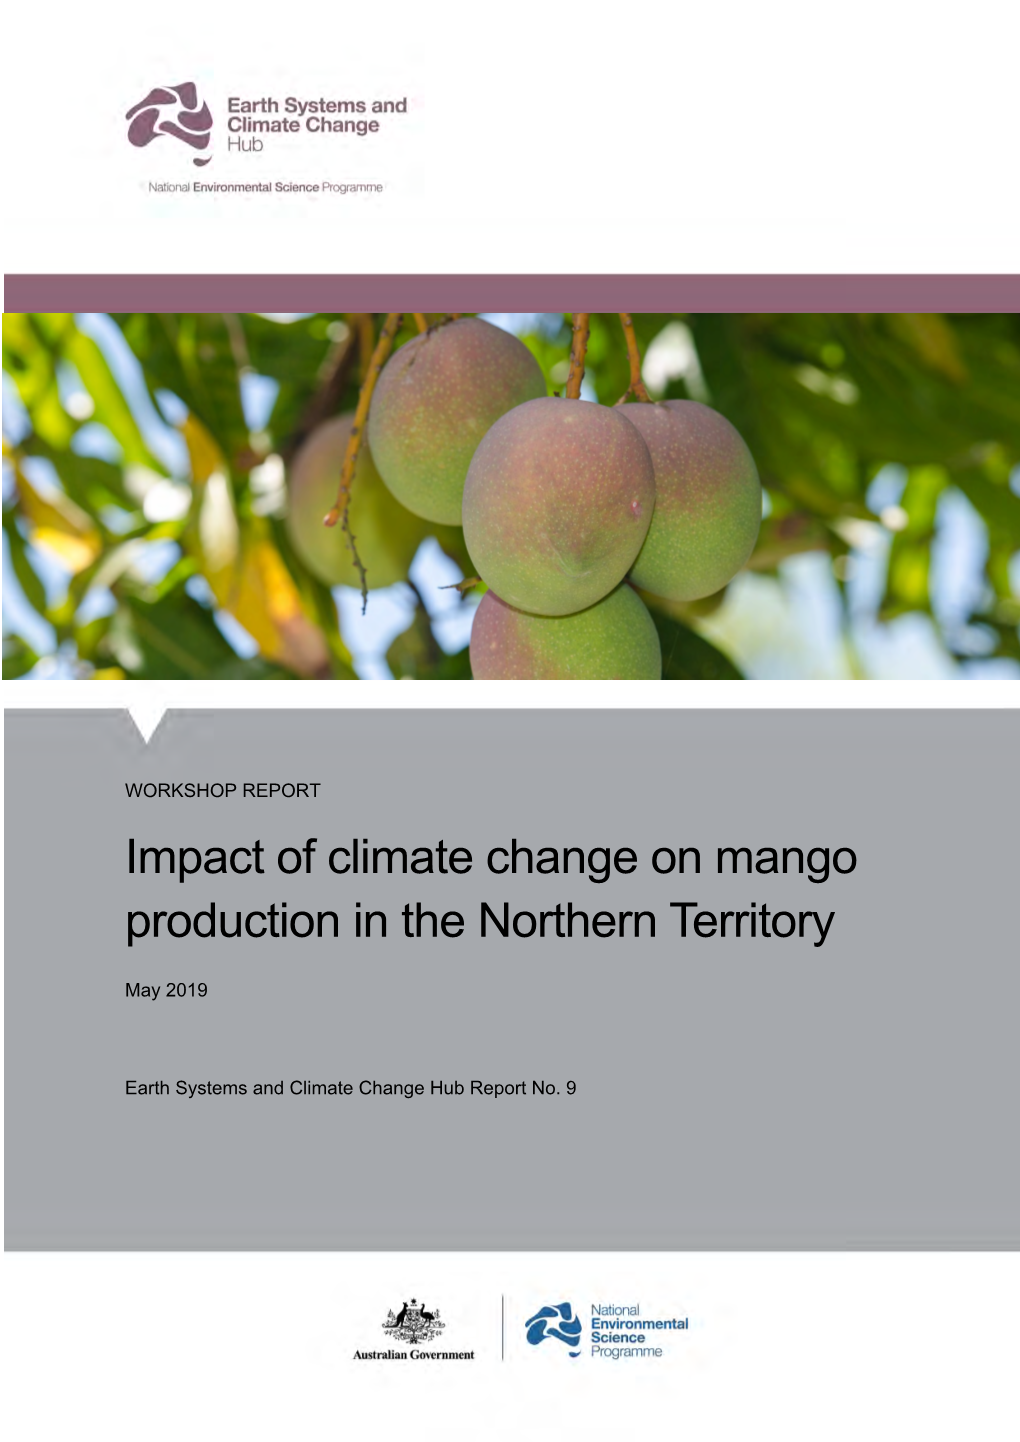 Impact of Climate Change on Mango Production in the Northern Territory